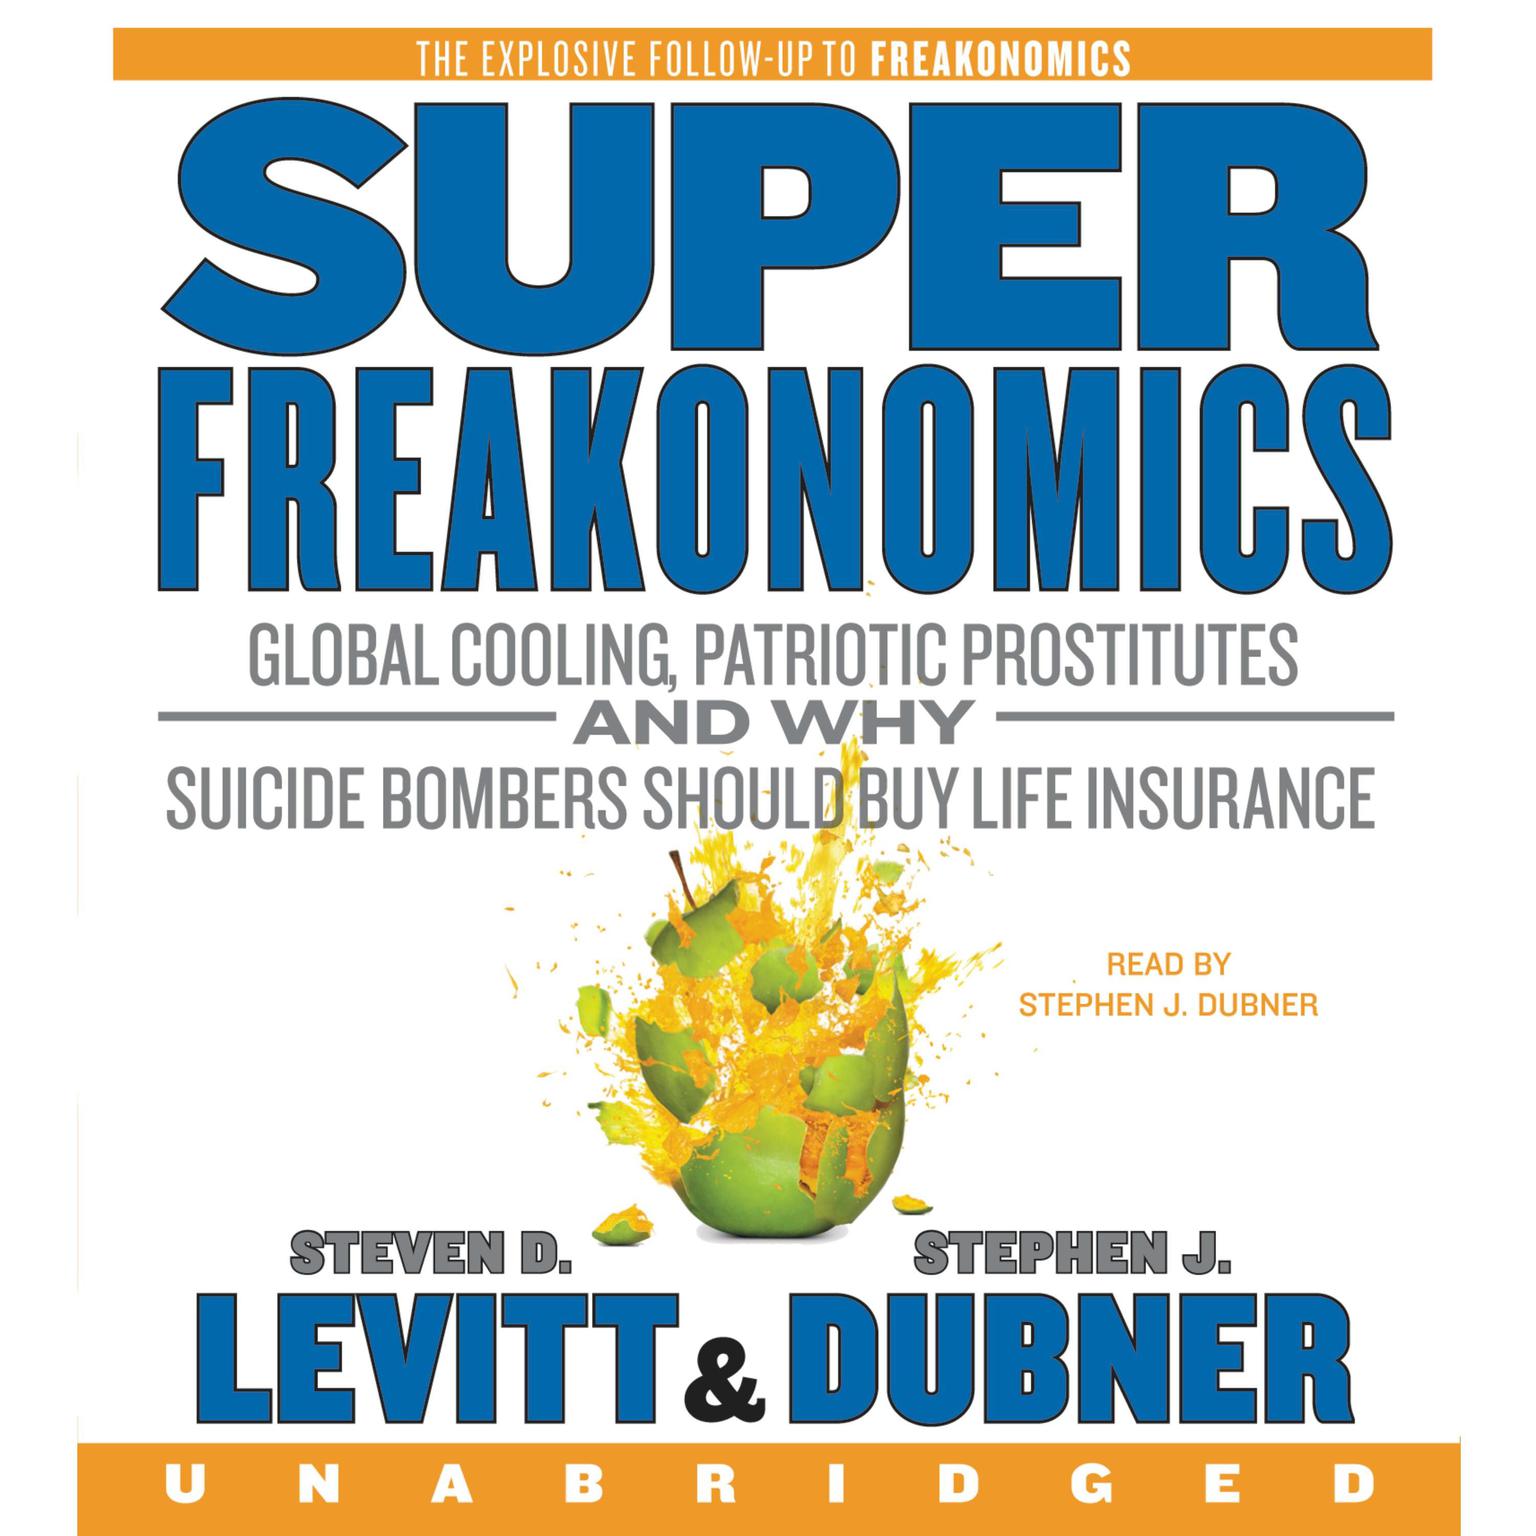 SuperFreakonomics: Global Cooling, Patriotic Prostitutes, and Why Suicide Bombers Should Buy Life Insurance Audiobook, by Steven D. Levitt